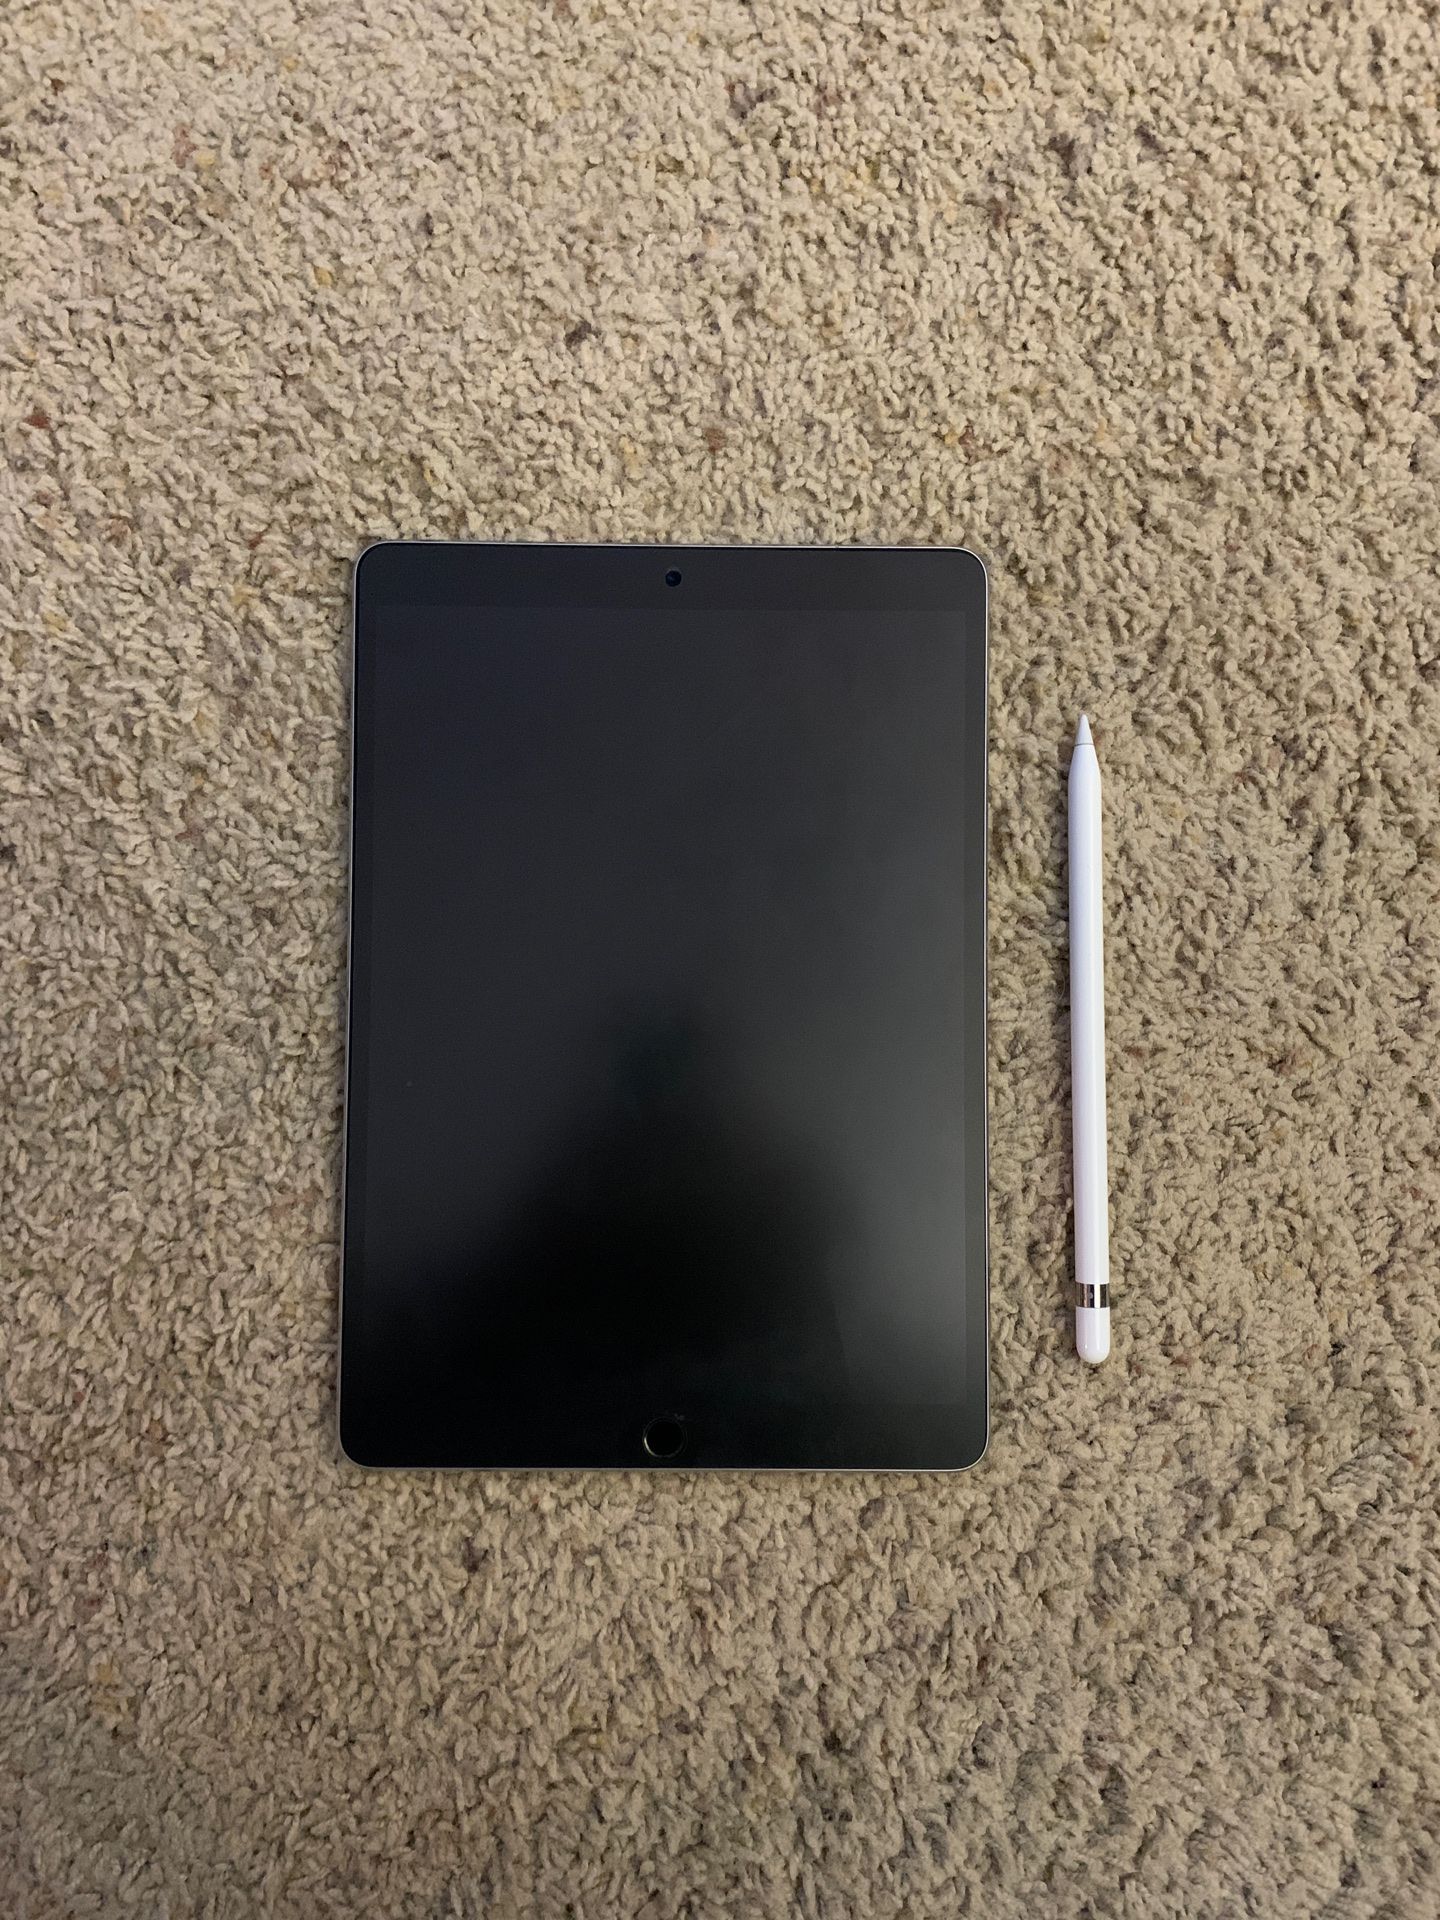 Apple iPad Pro 10.5” (WiFi & cellular) with accessories